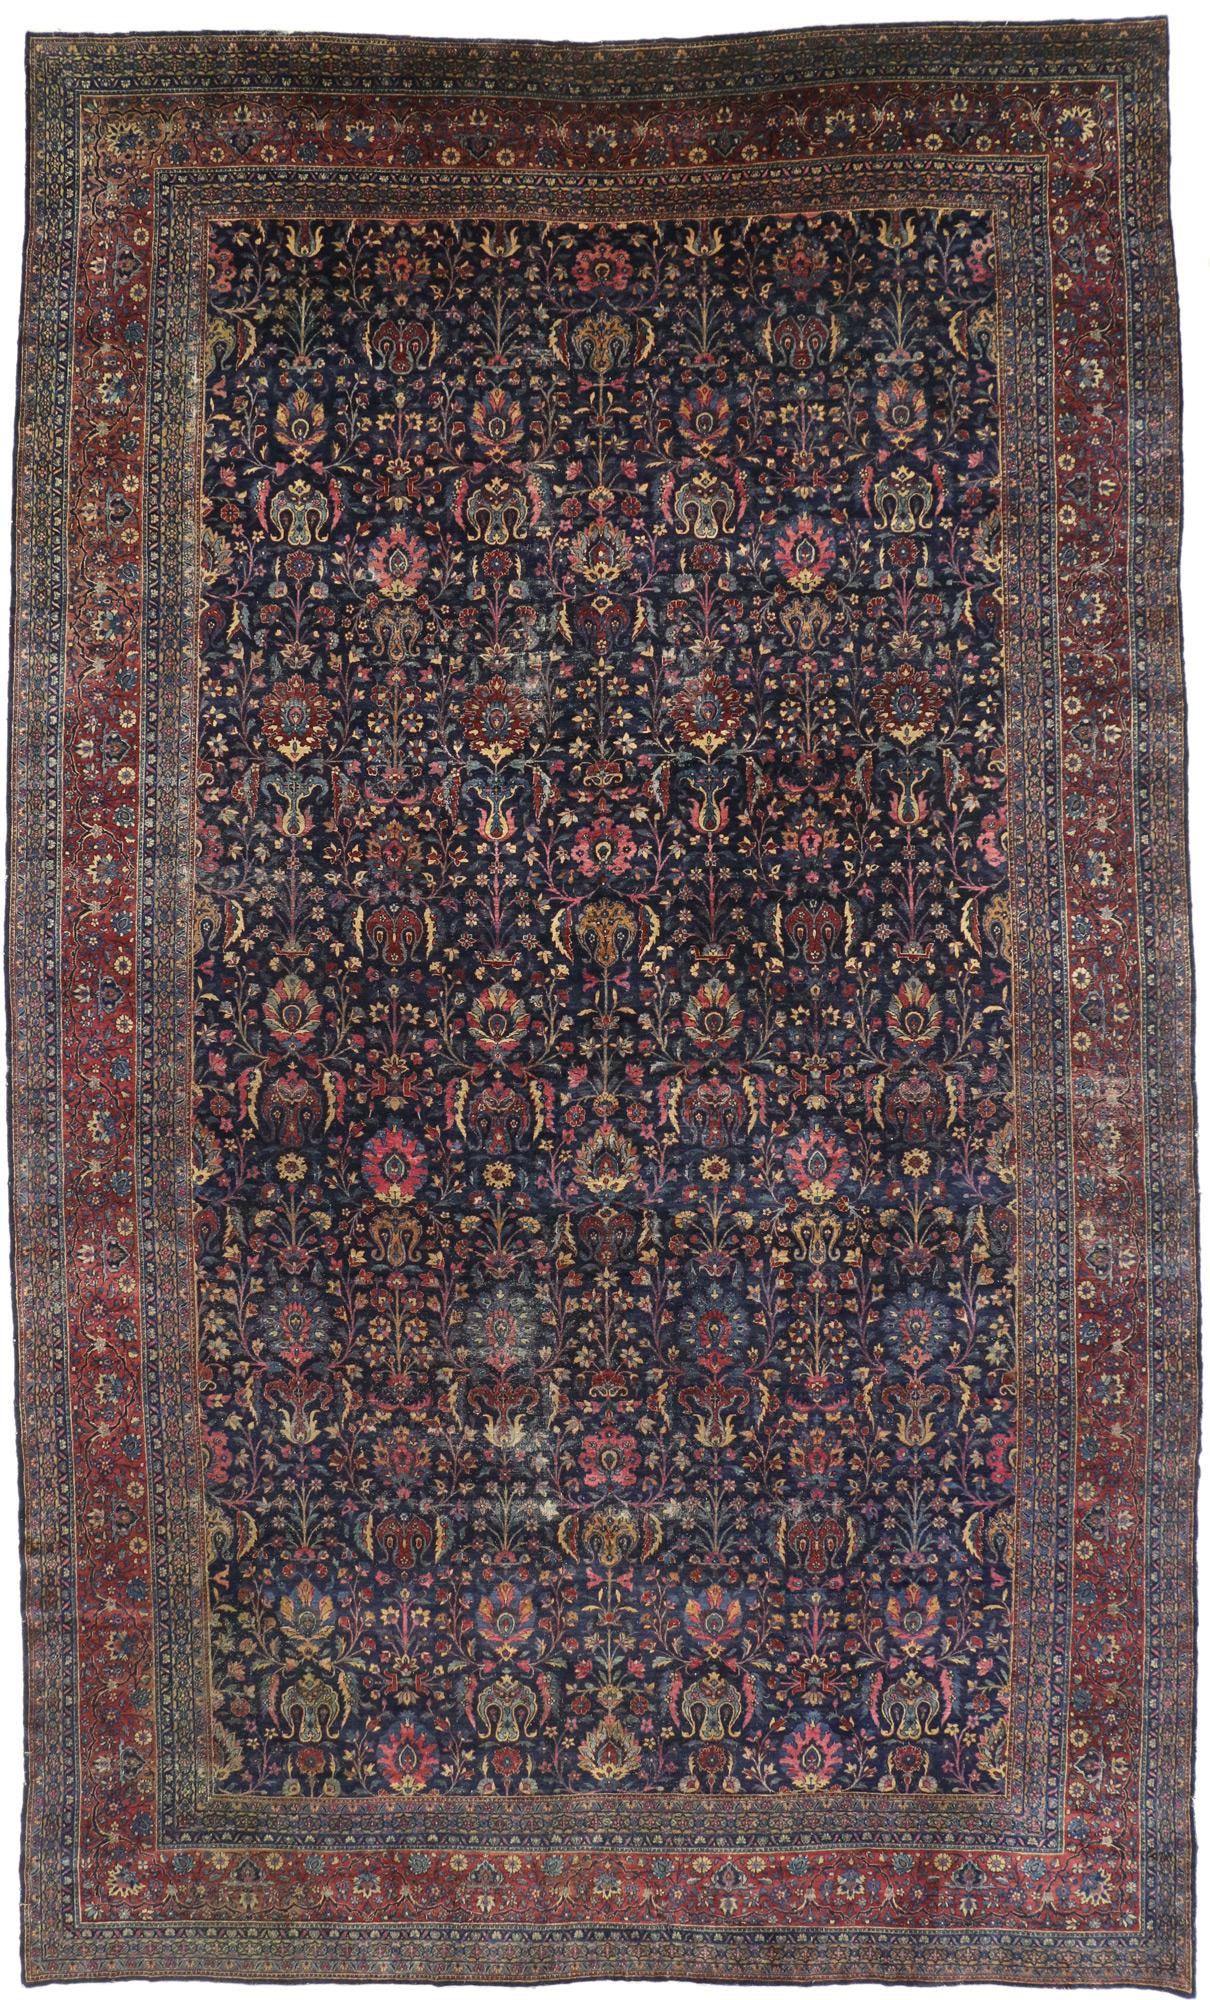 Wool Antique Persian Kerman Rug, Hotel Lobby Size Carpet For Sale